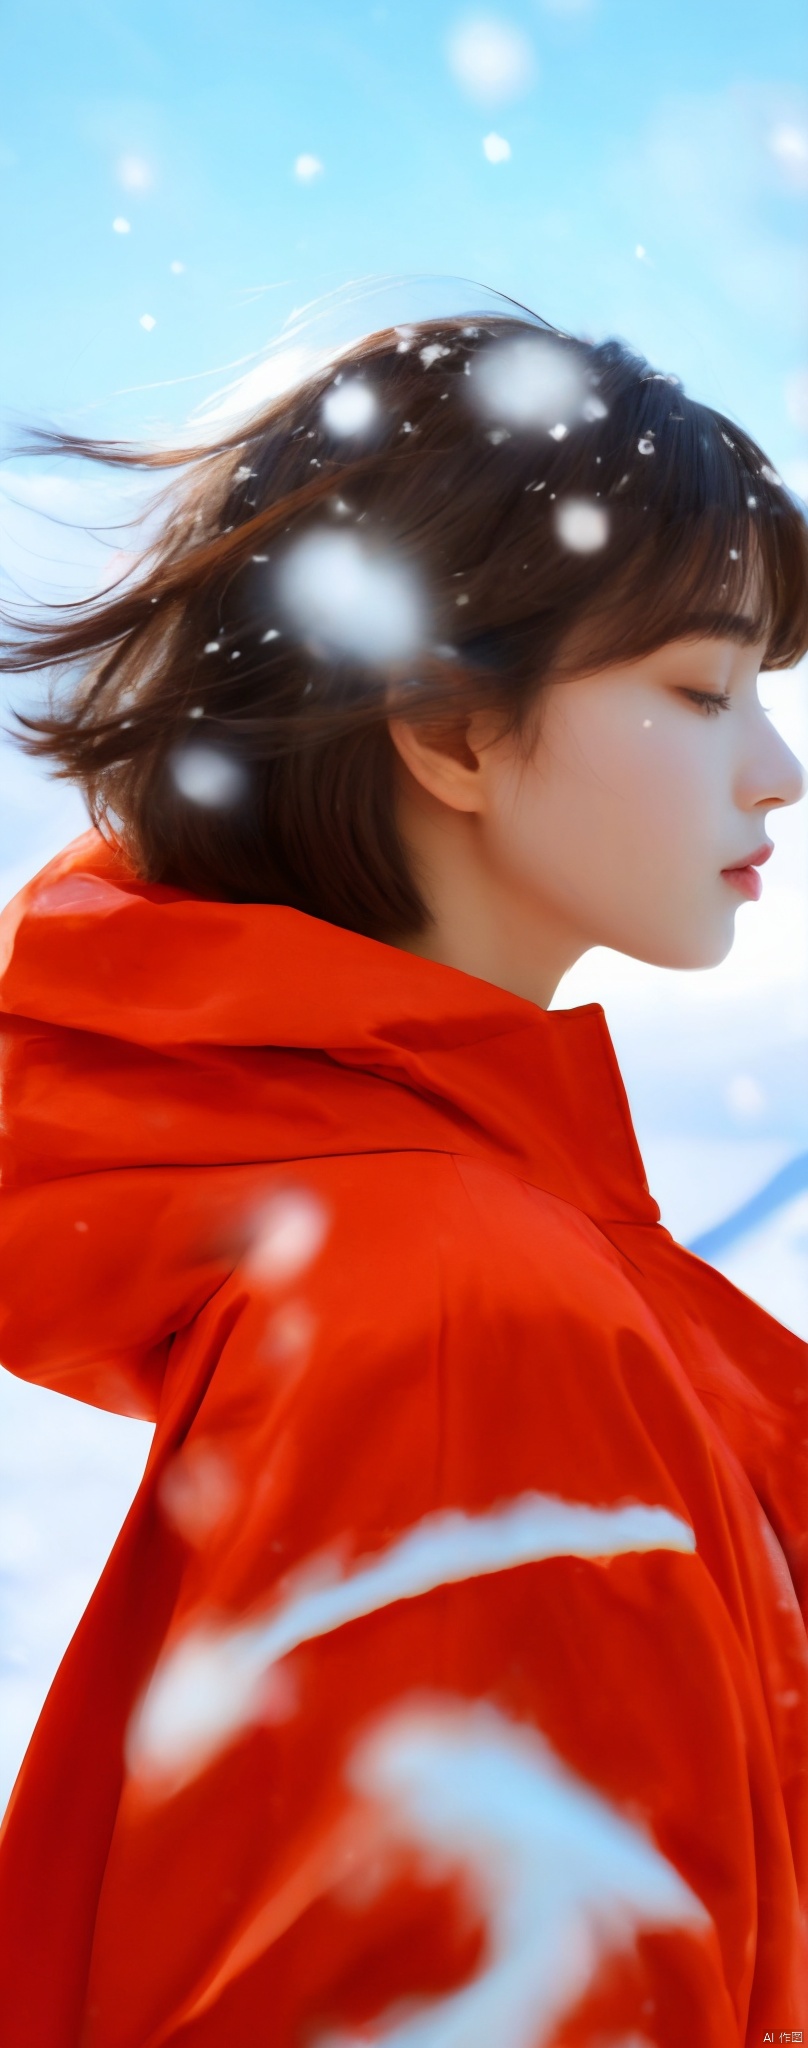  A short-haired girl standing in the snow, Red Coat, head up, breeze blowing hair, snow, snowflakes, depth of field, telephoto lens, messy hair, (close-up) , (sad) , sad and melancholy atmosphere, reference movie love letter, profile, head up, ((floating)) bangs or fringes of hair, eyes focused, half-closed, center frame, bottom to top,